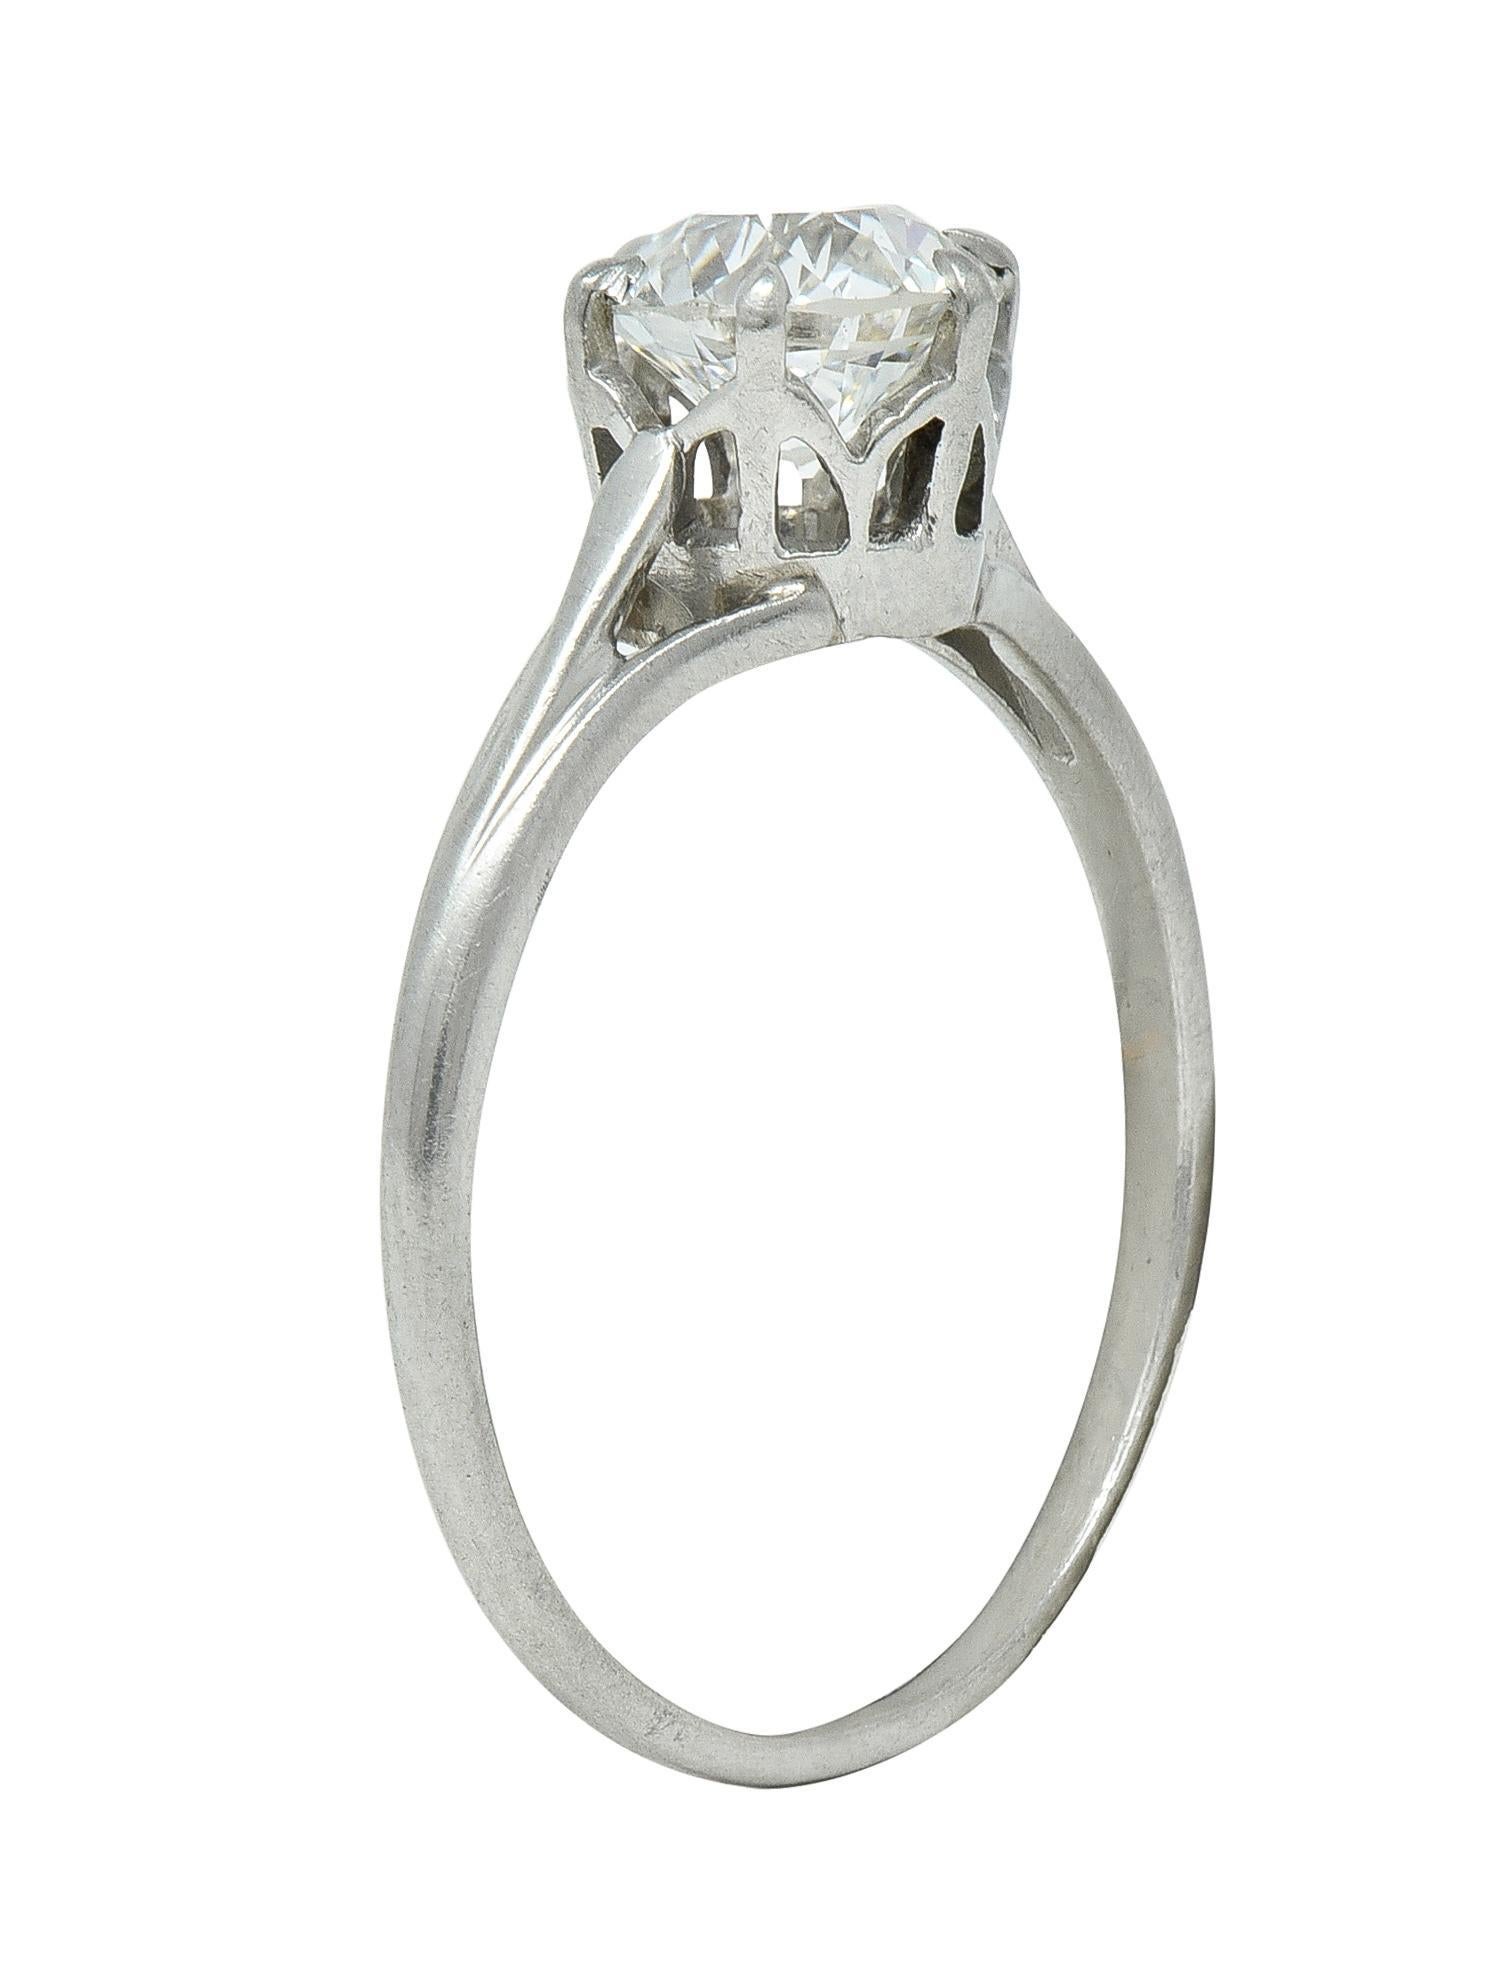 Early Art Deco 0.73 CTW Old European Cut Diamond Platinum Engagement Ring For Sale 5